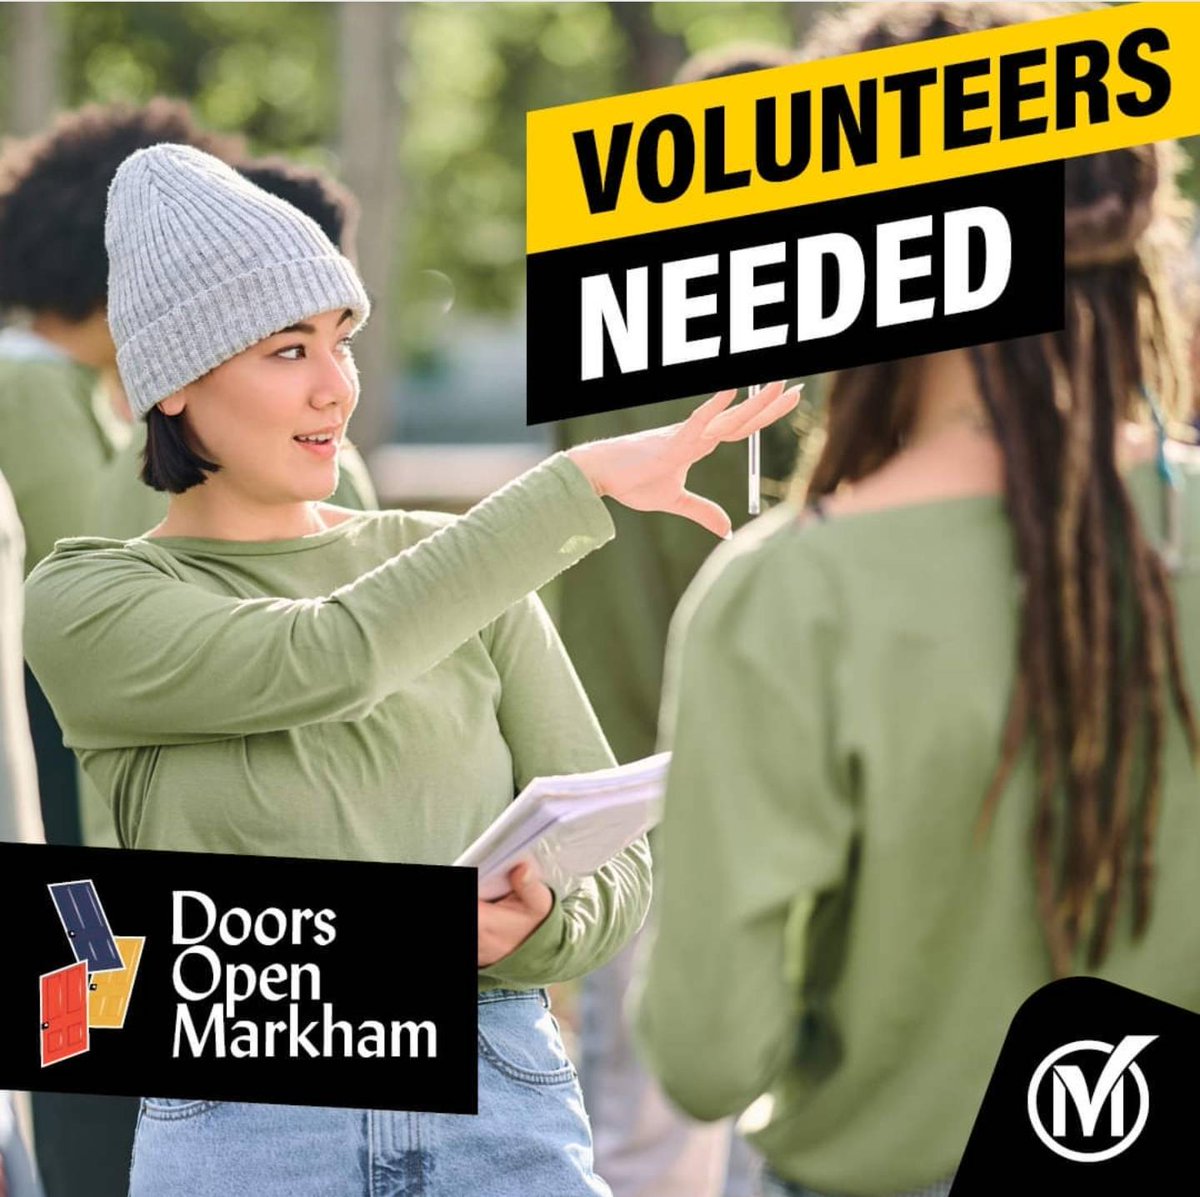 We are looking for a few more volunteers to join us as our Doors Open Ambassadors on June 8. Help guide guests through the various historic sites participating in Doors Open Markham. Learn more about this volunteer opportunity at: markham.ca/Volunteering